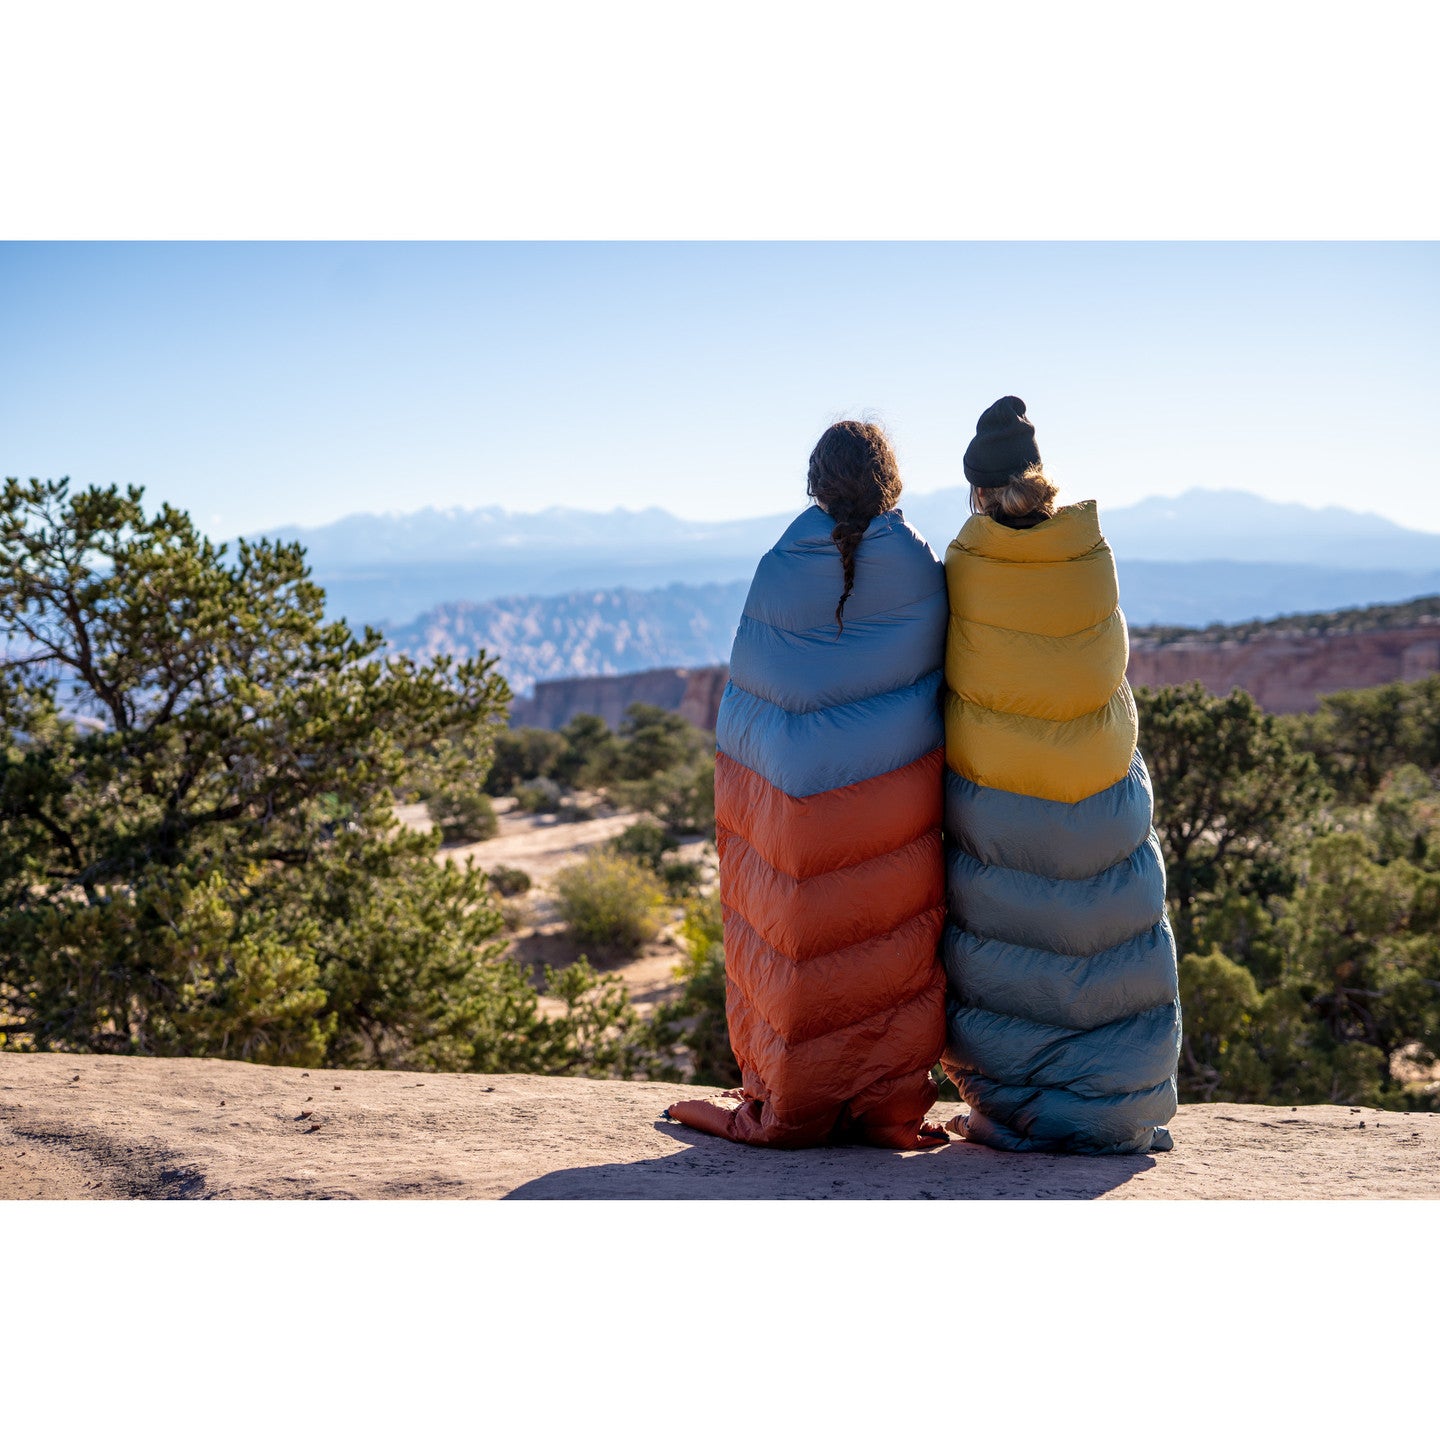 the kelty galactic 30 degree down sleeping bag. two models with the bags draped over them looking at the desert